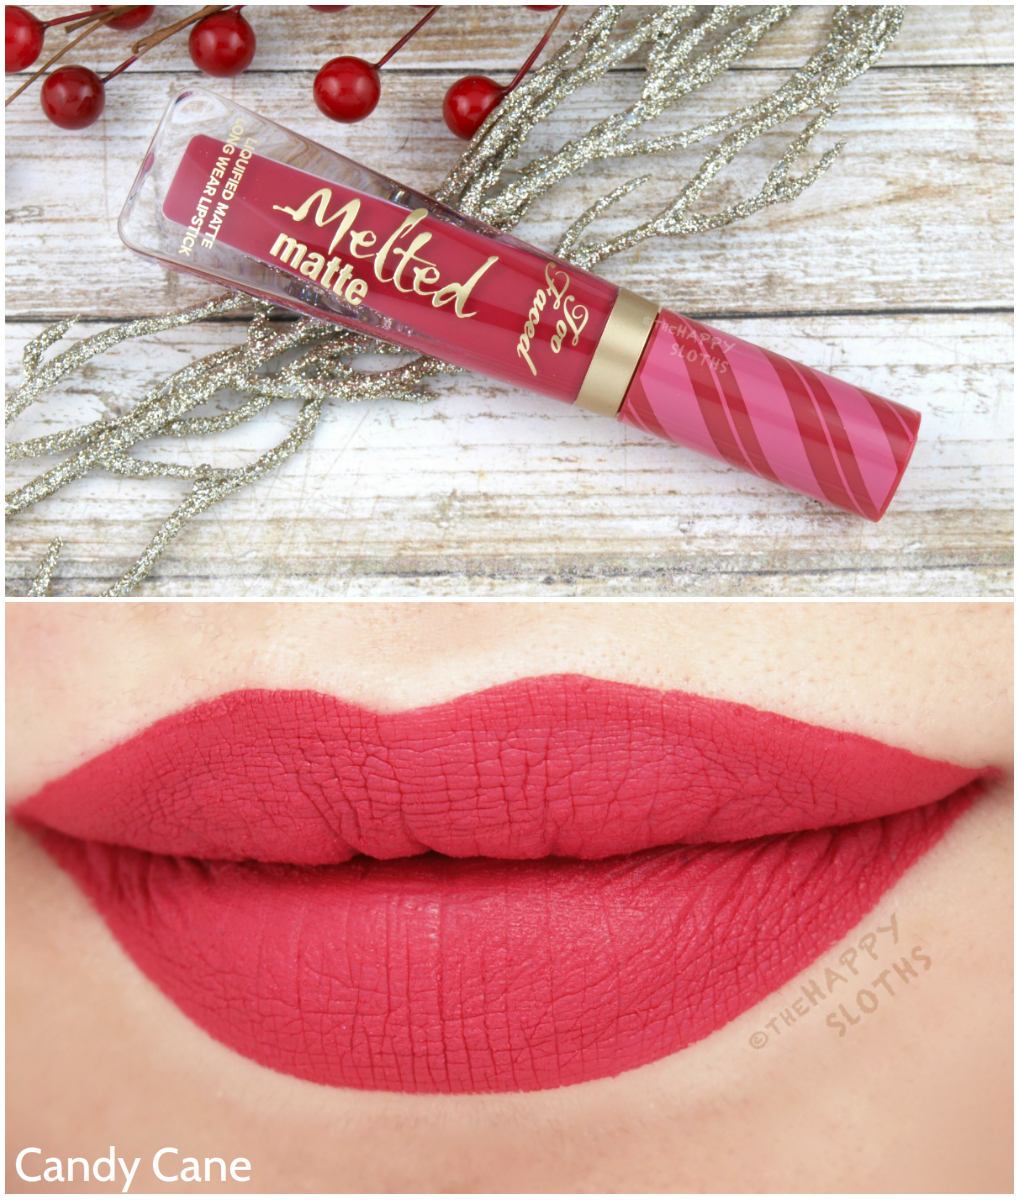 Too Faced Melted Matte Liquified Long Wear Matte Lipstick in Candy Cane